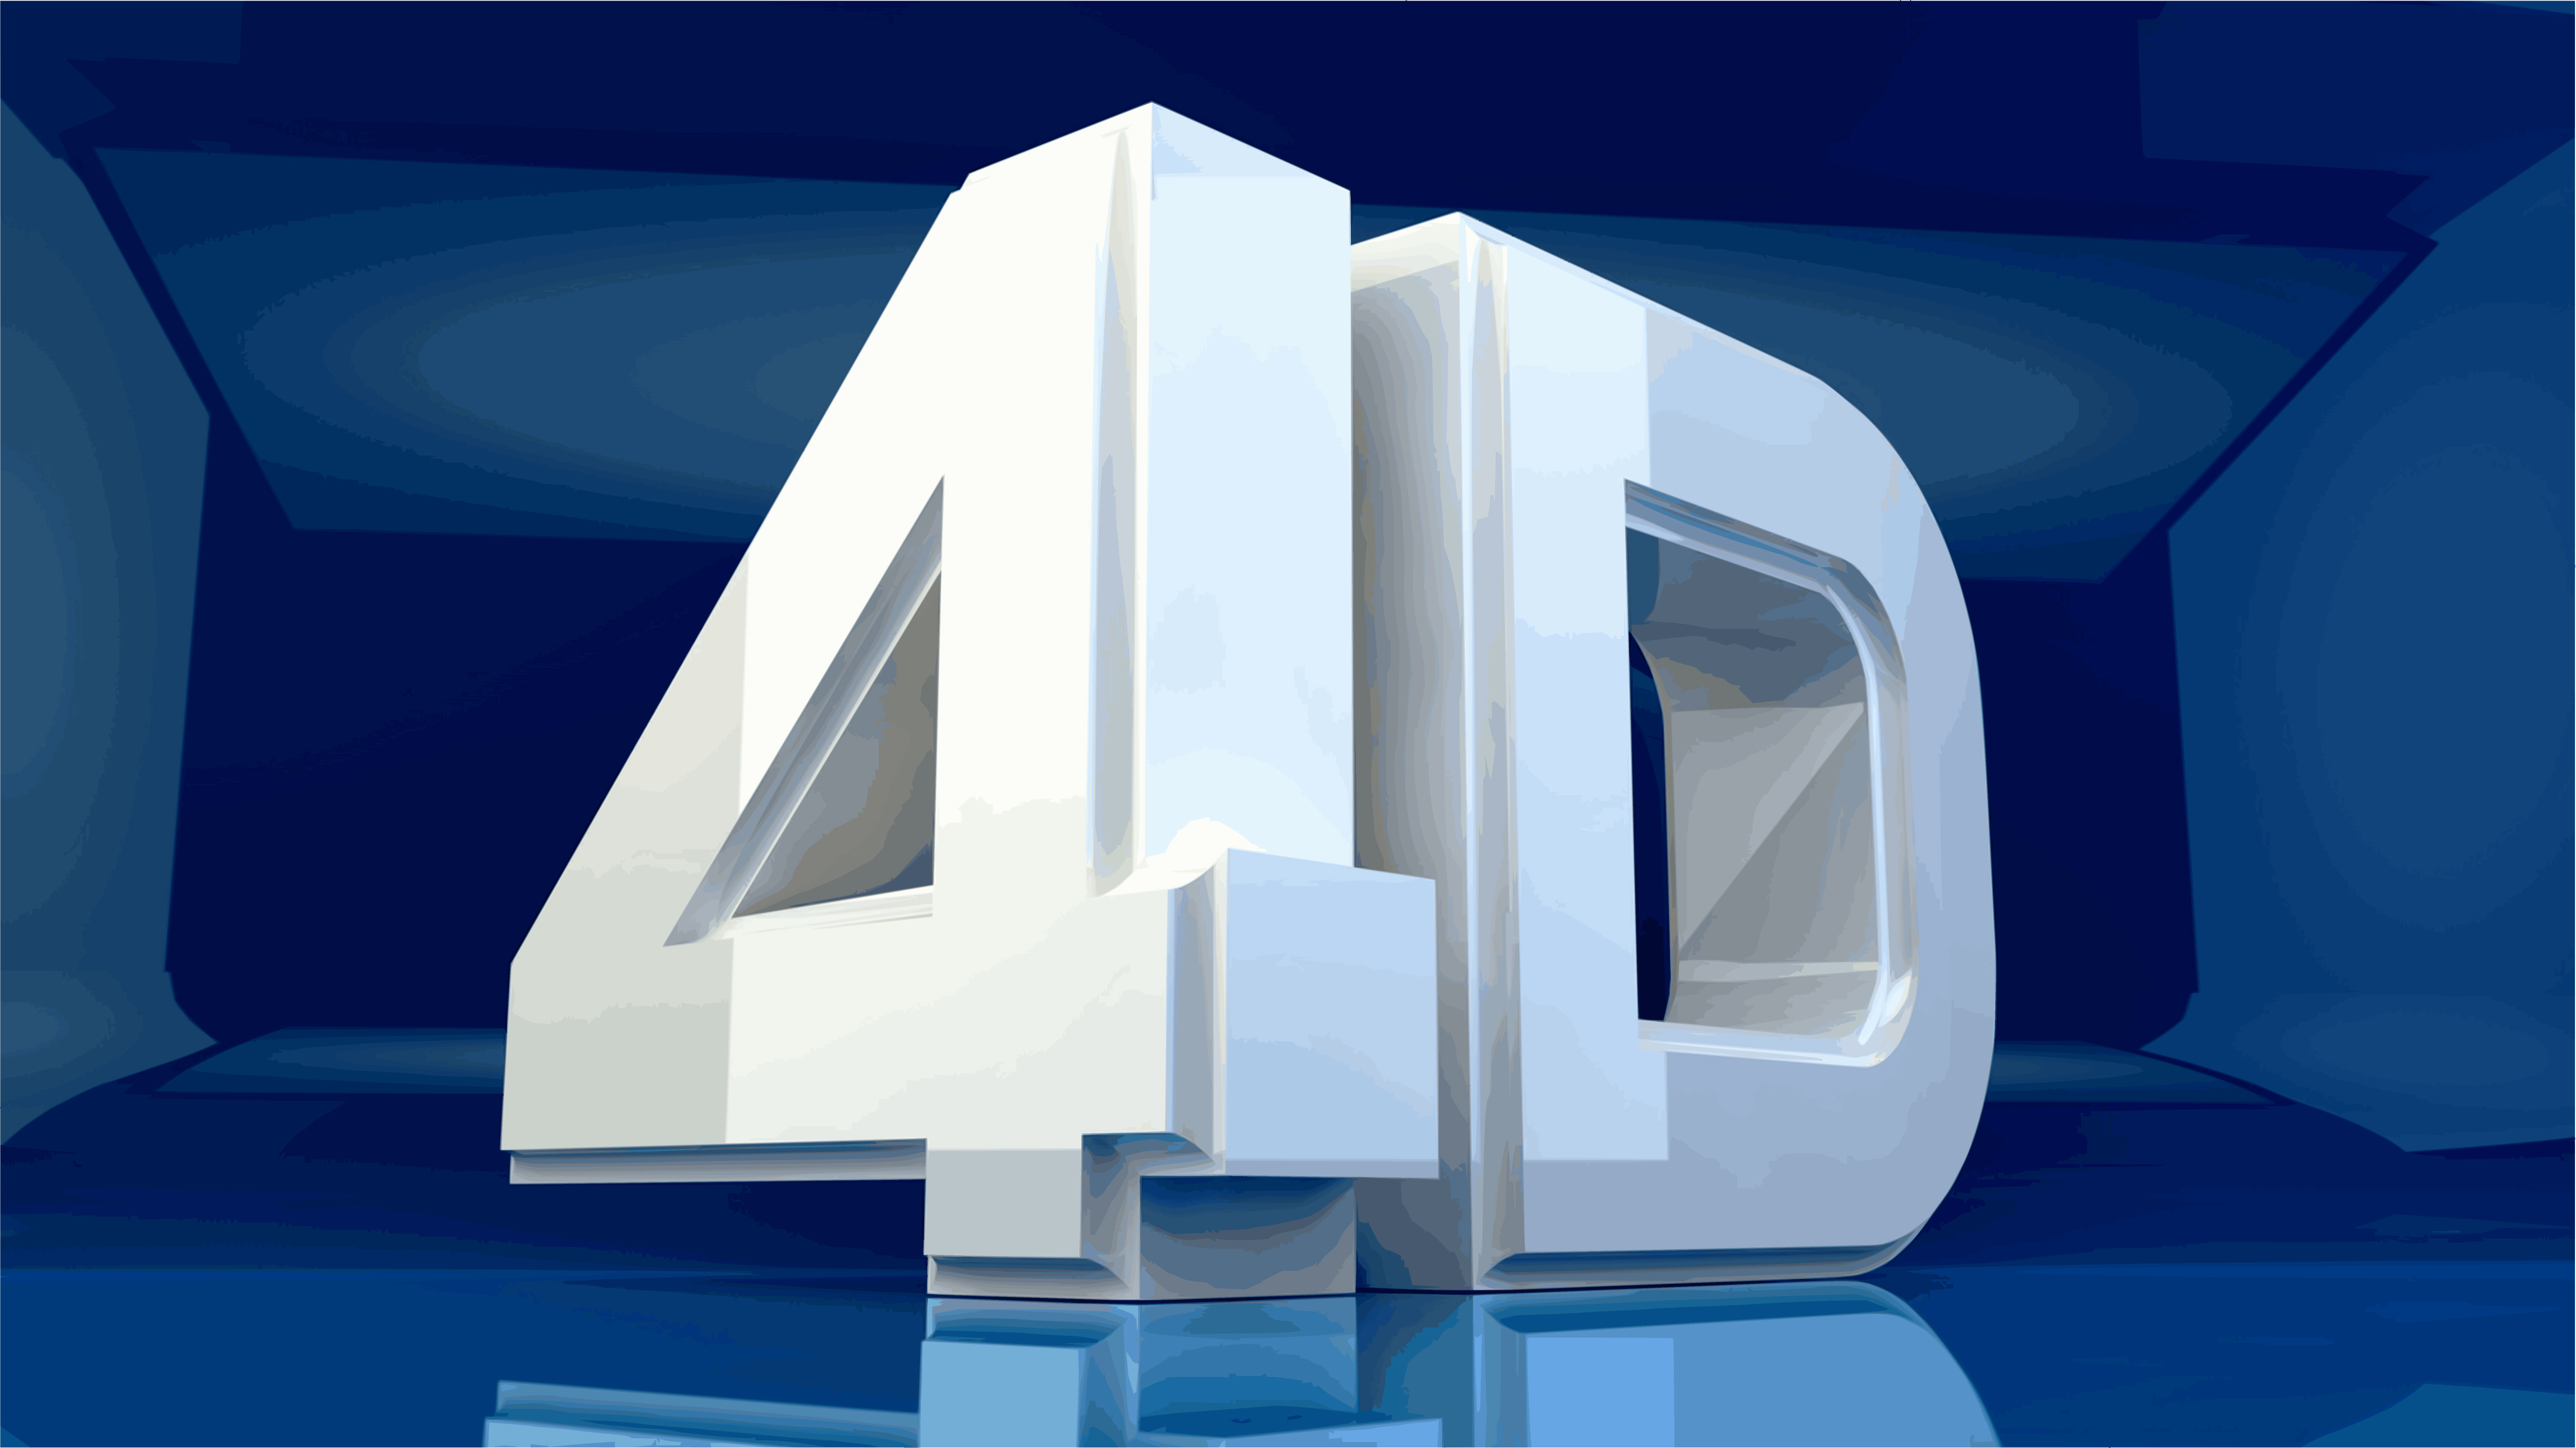 will 4D technology be the next big thing in cinema